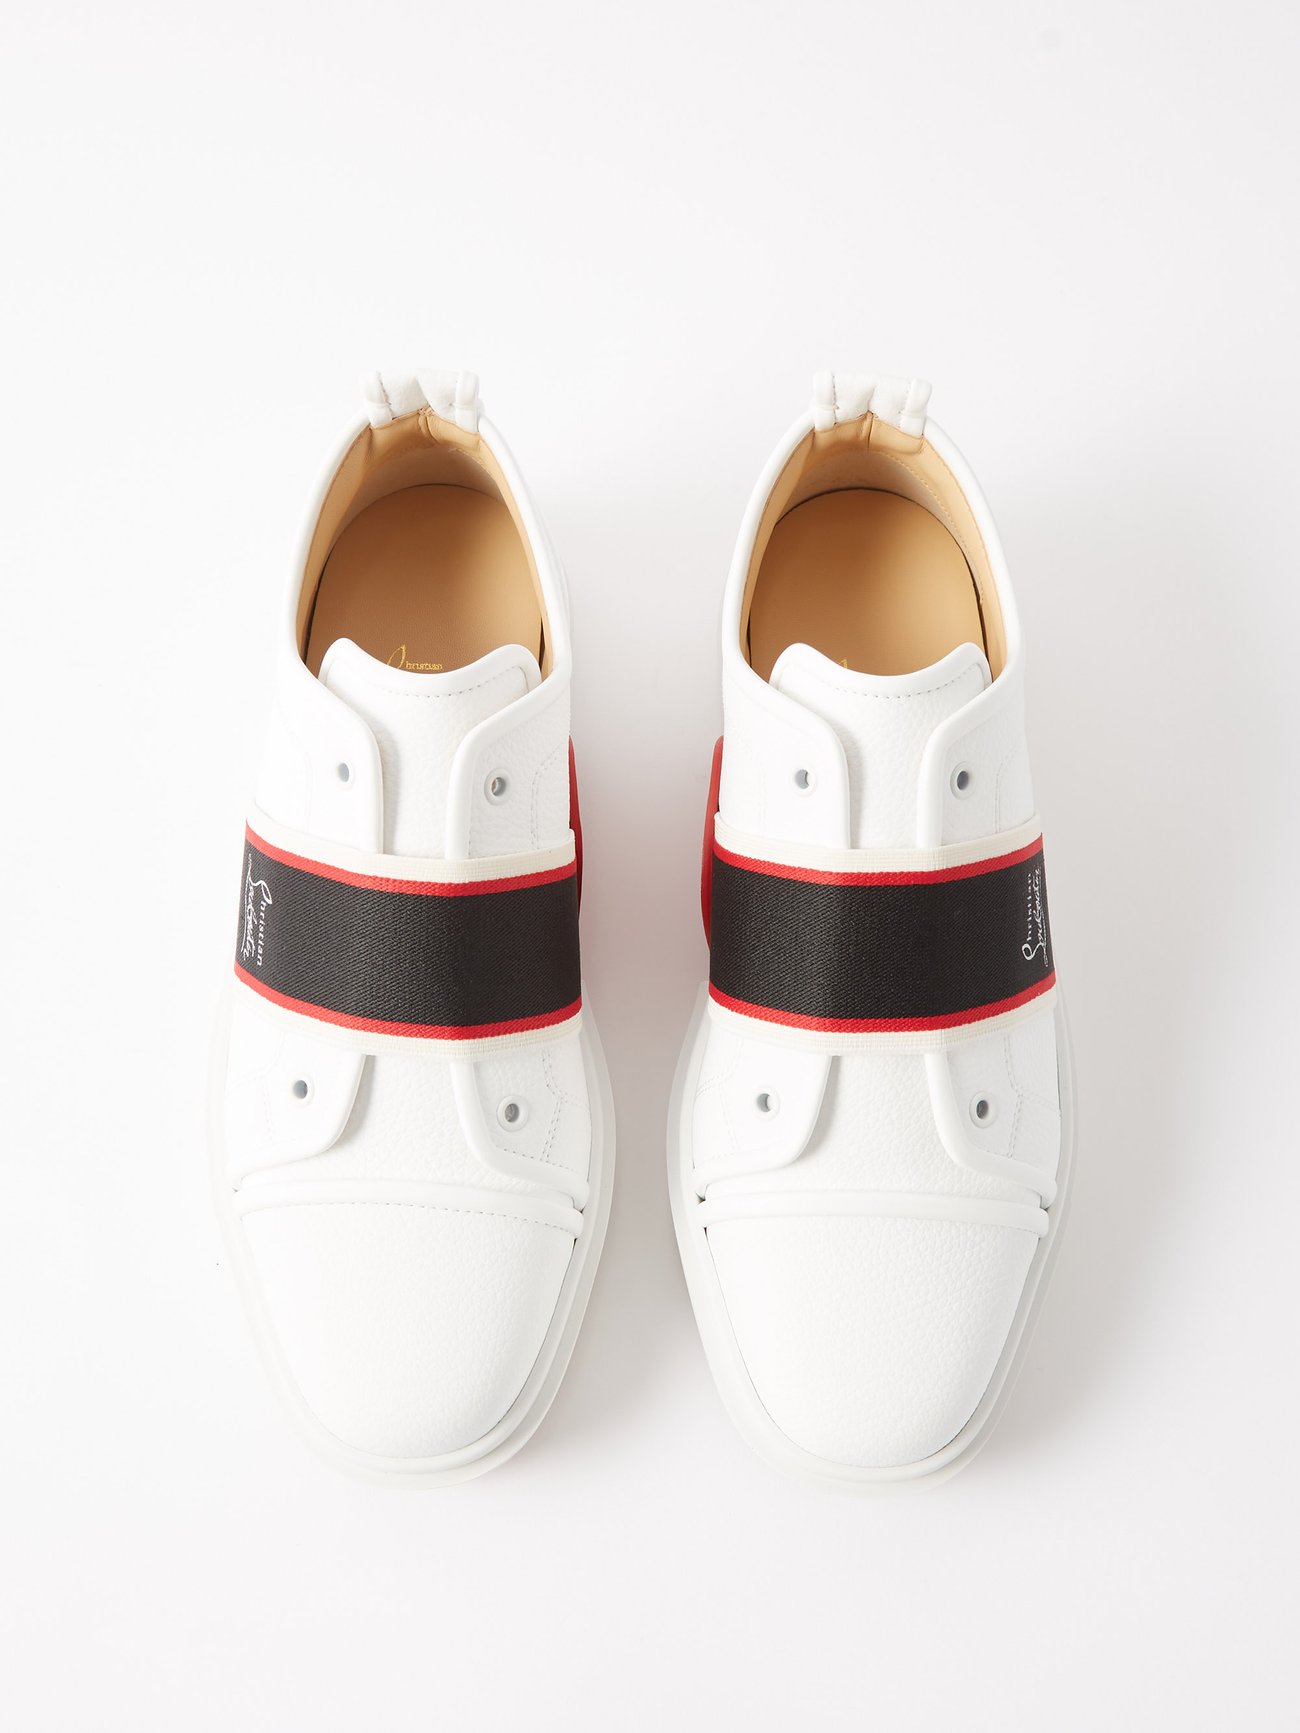 Christian Louboutin - Adolescenza Faux-Leather Slip-On Trainers - Mens - White